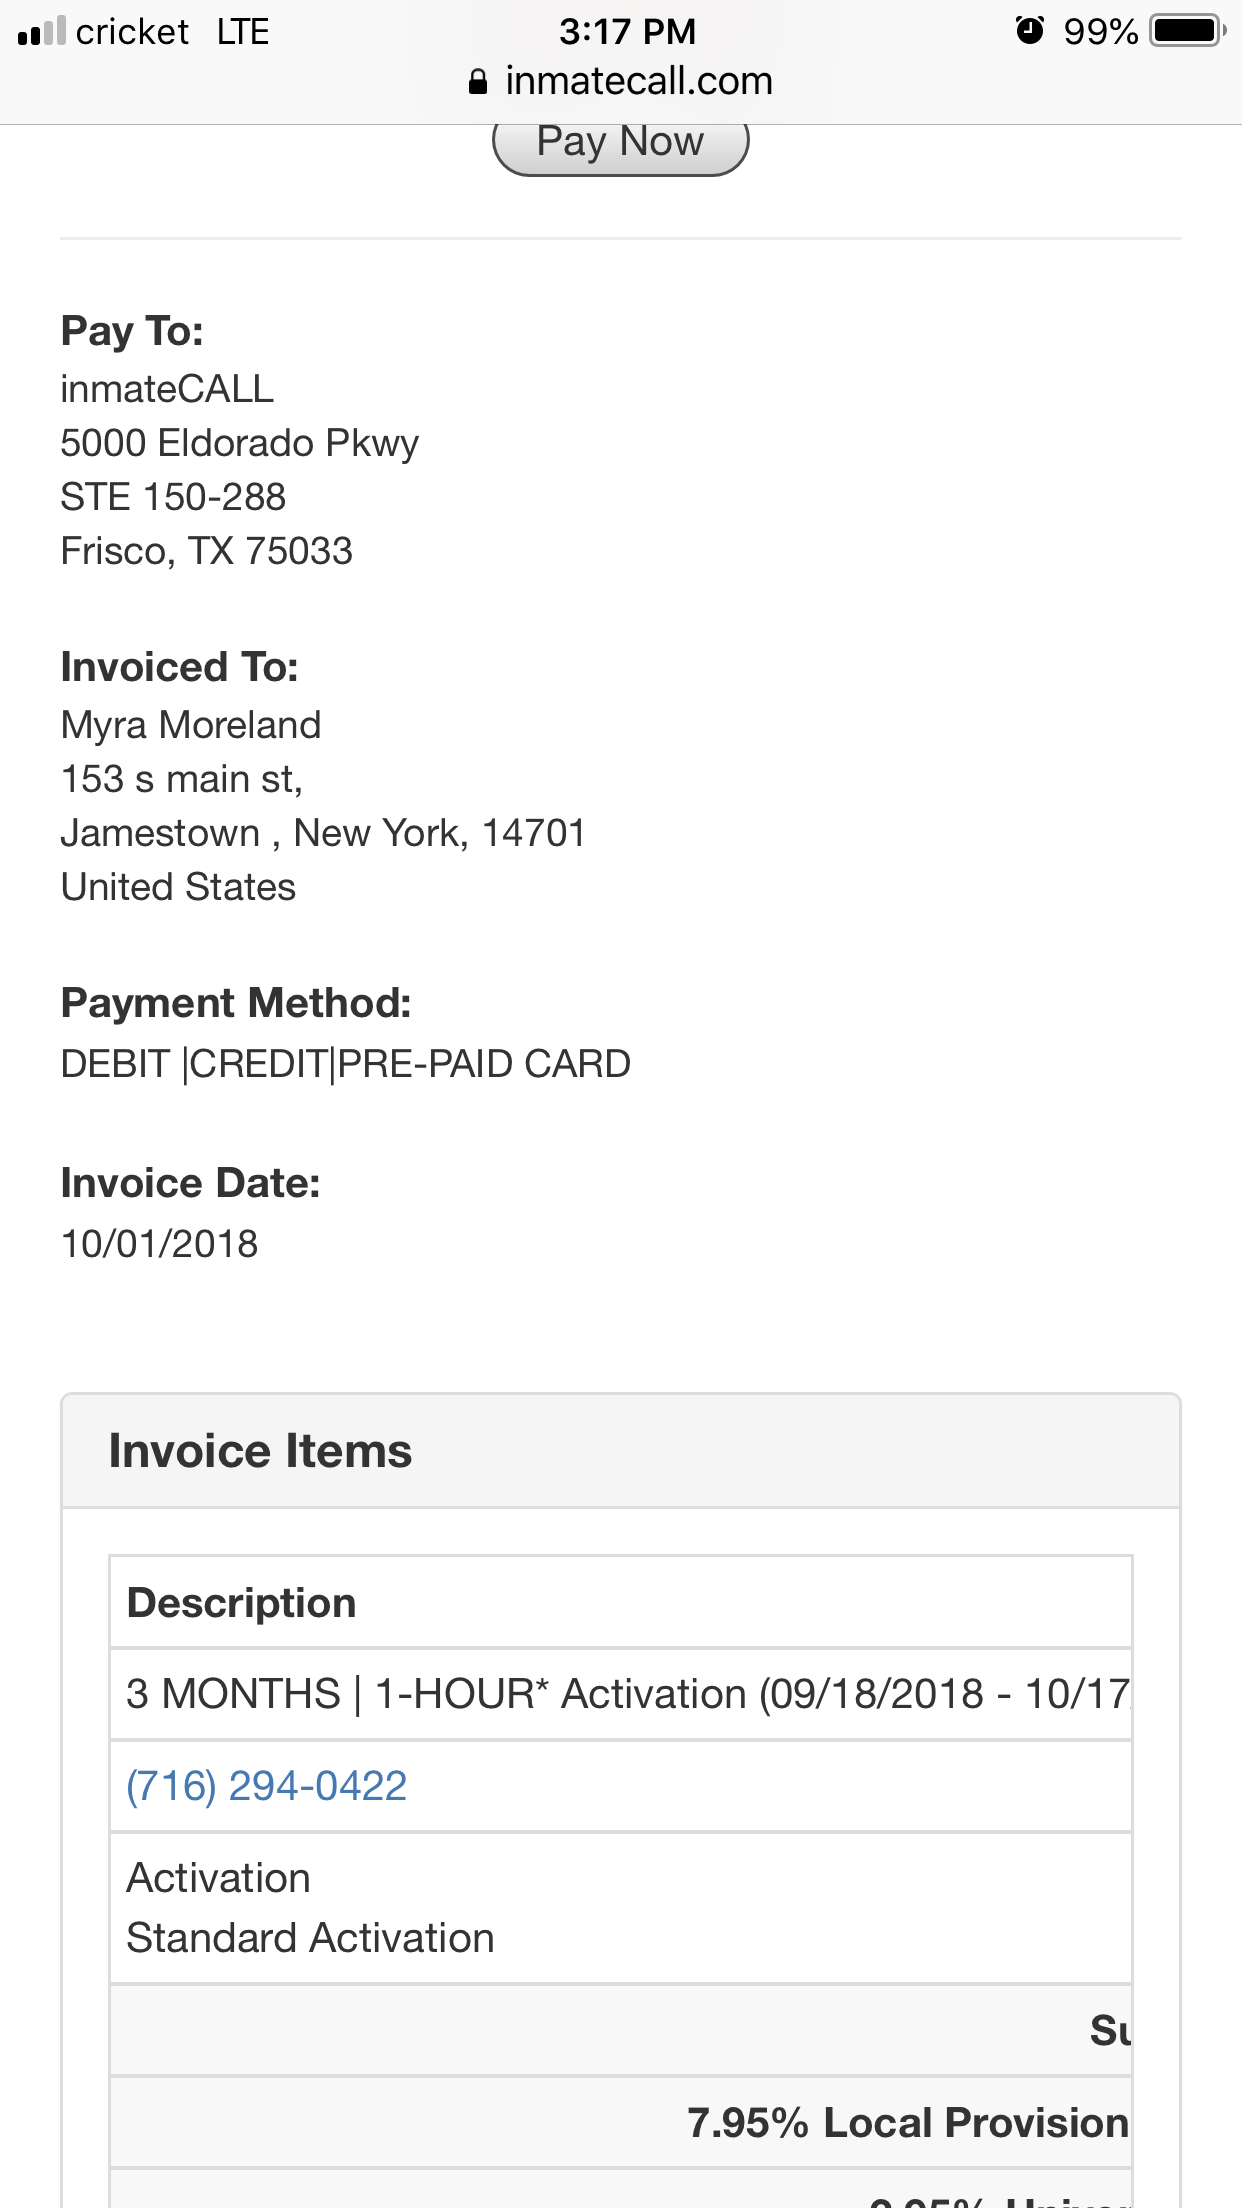 Proof of service details invoice